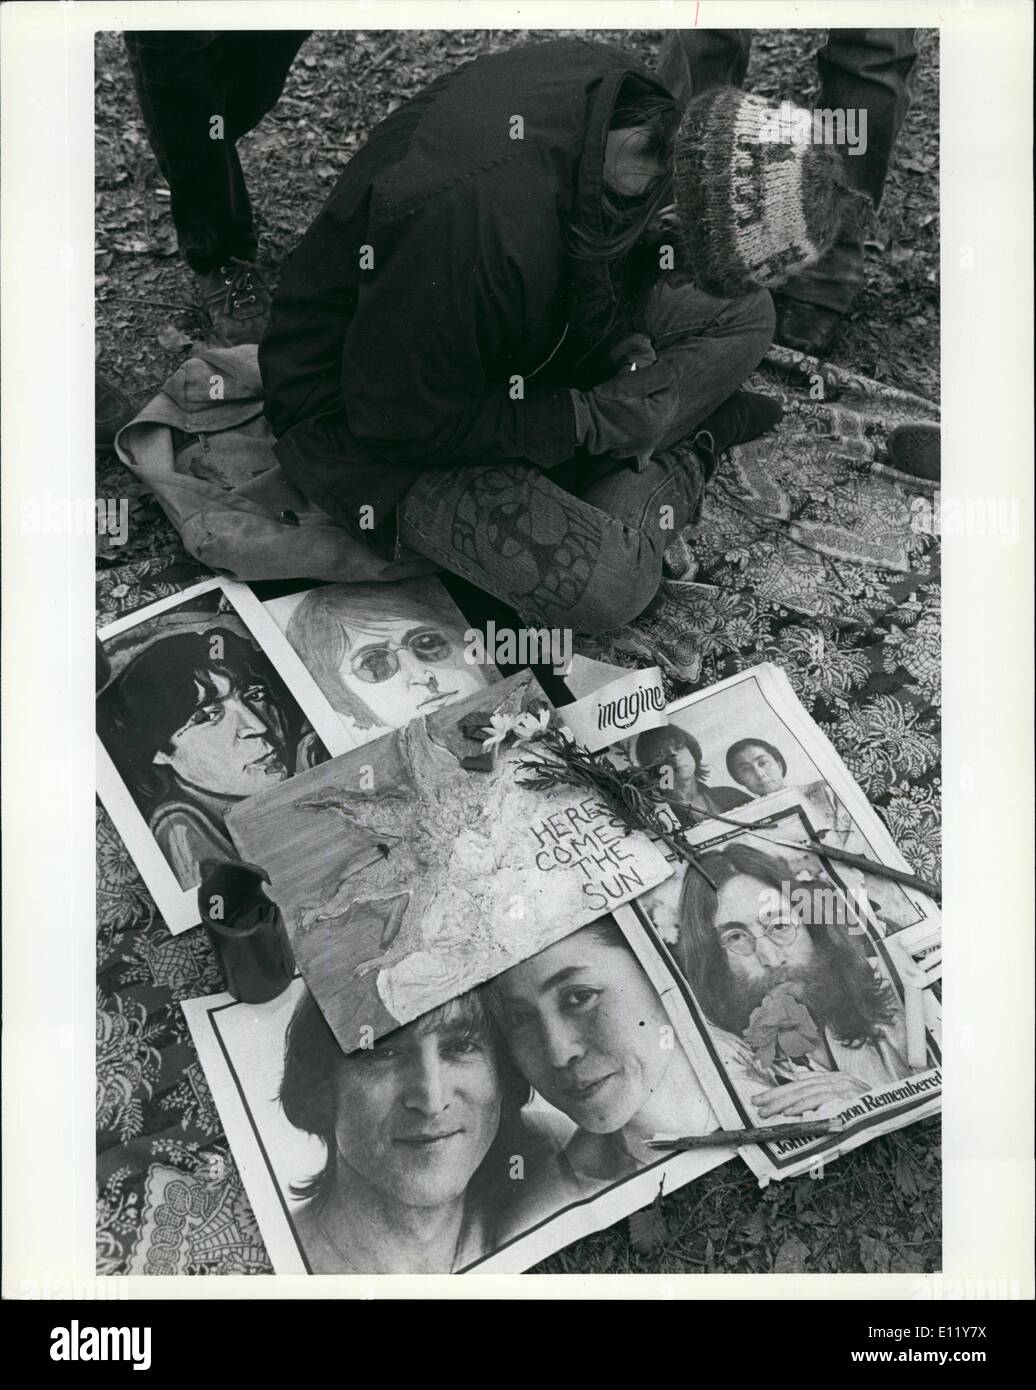 Dec. 12, 1980 - Central park, New york: Tens of thousands gathered in central park today for a ten minute silent vigil for slain Beatle, John Lennon. Photo shows Mourners in central park Stock Photo